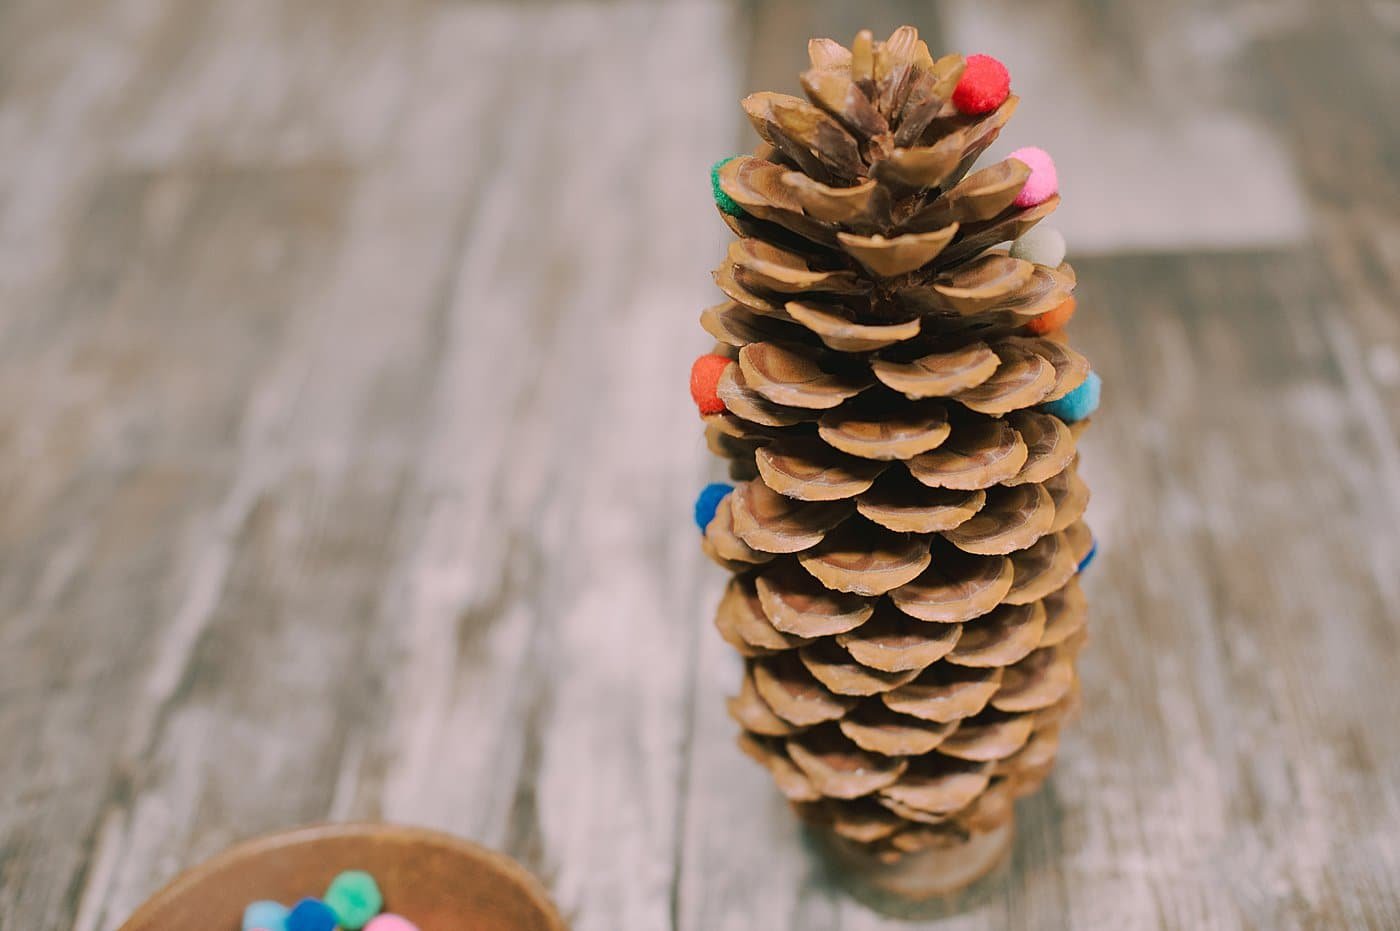 Turn the pine cone and add pom poms to the other sides.